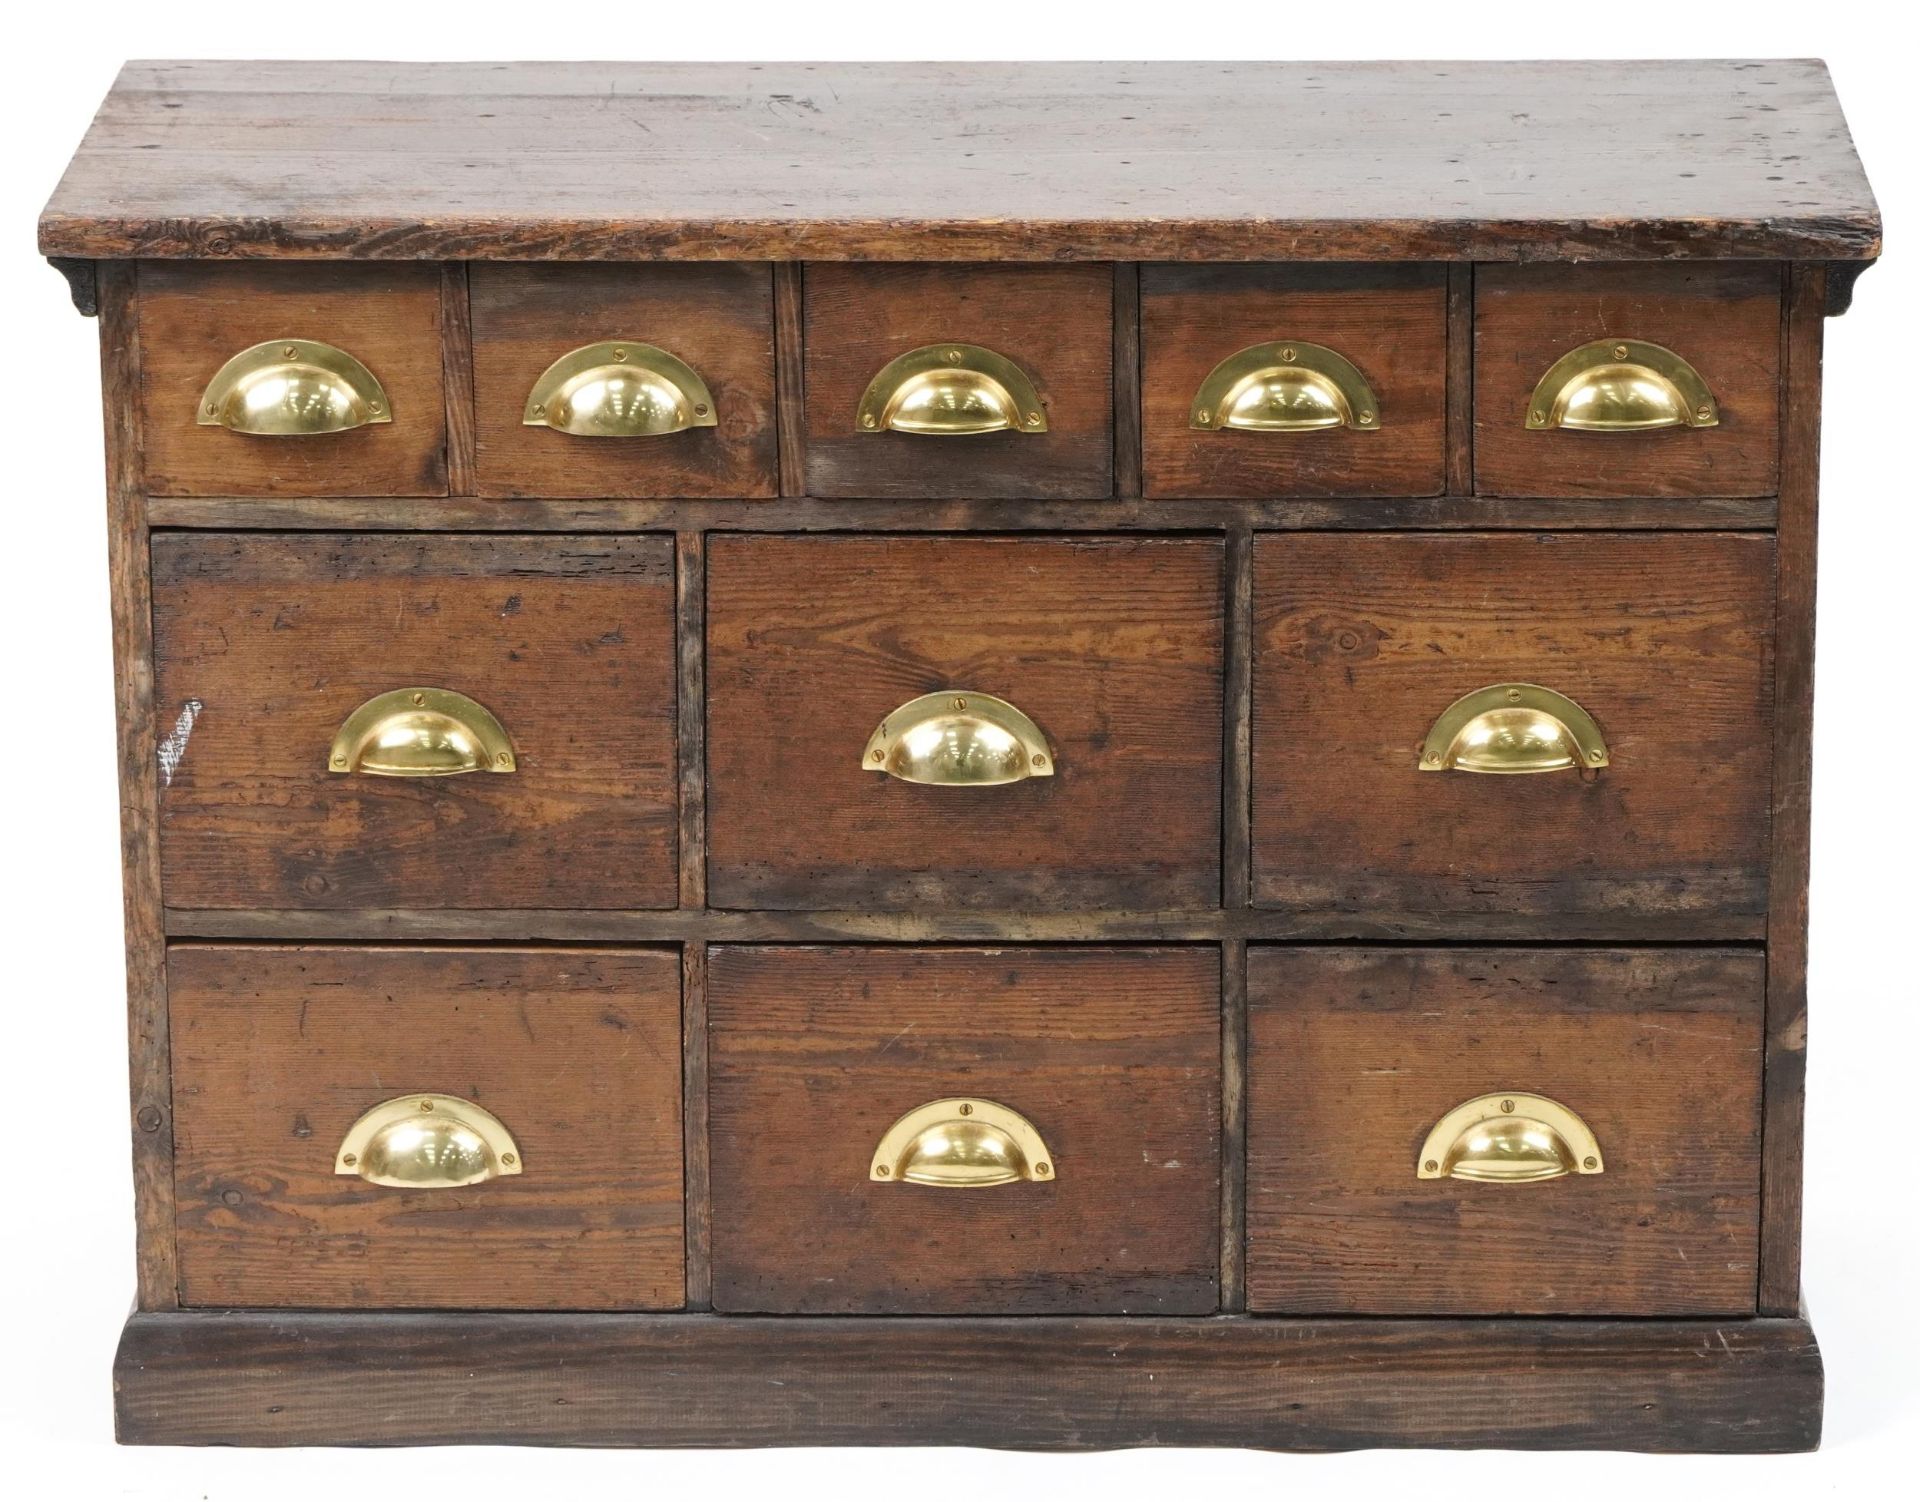 Stained pine haberdashery chest fitted with an arrangement of eleven drawers having brass handles, - Image 2 of 4